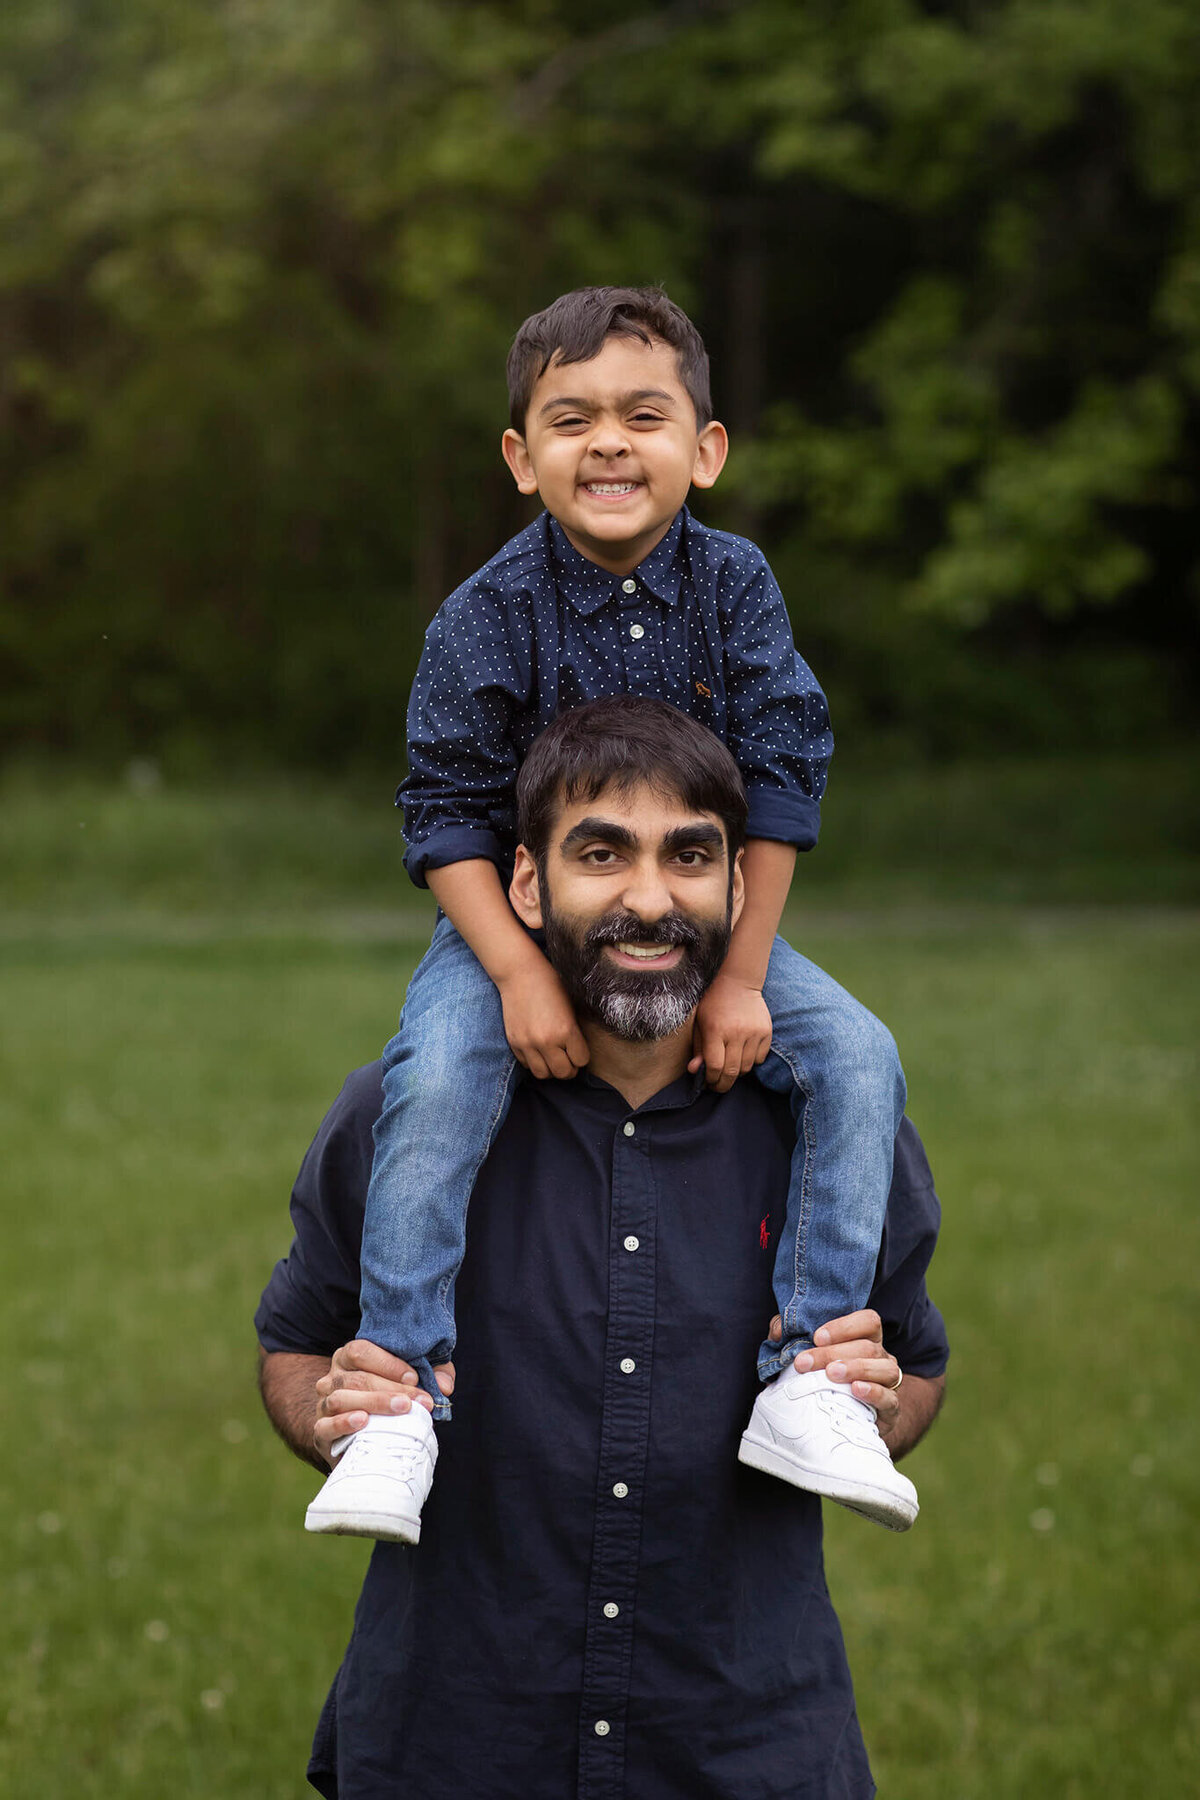 Kristine Esposito Photography captures dad and his son